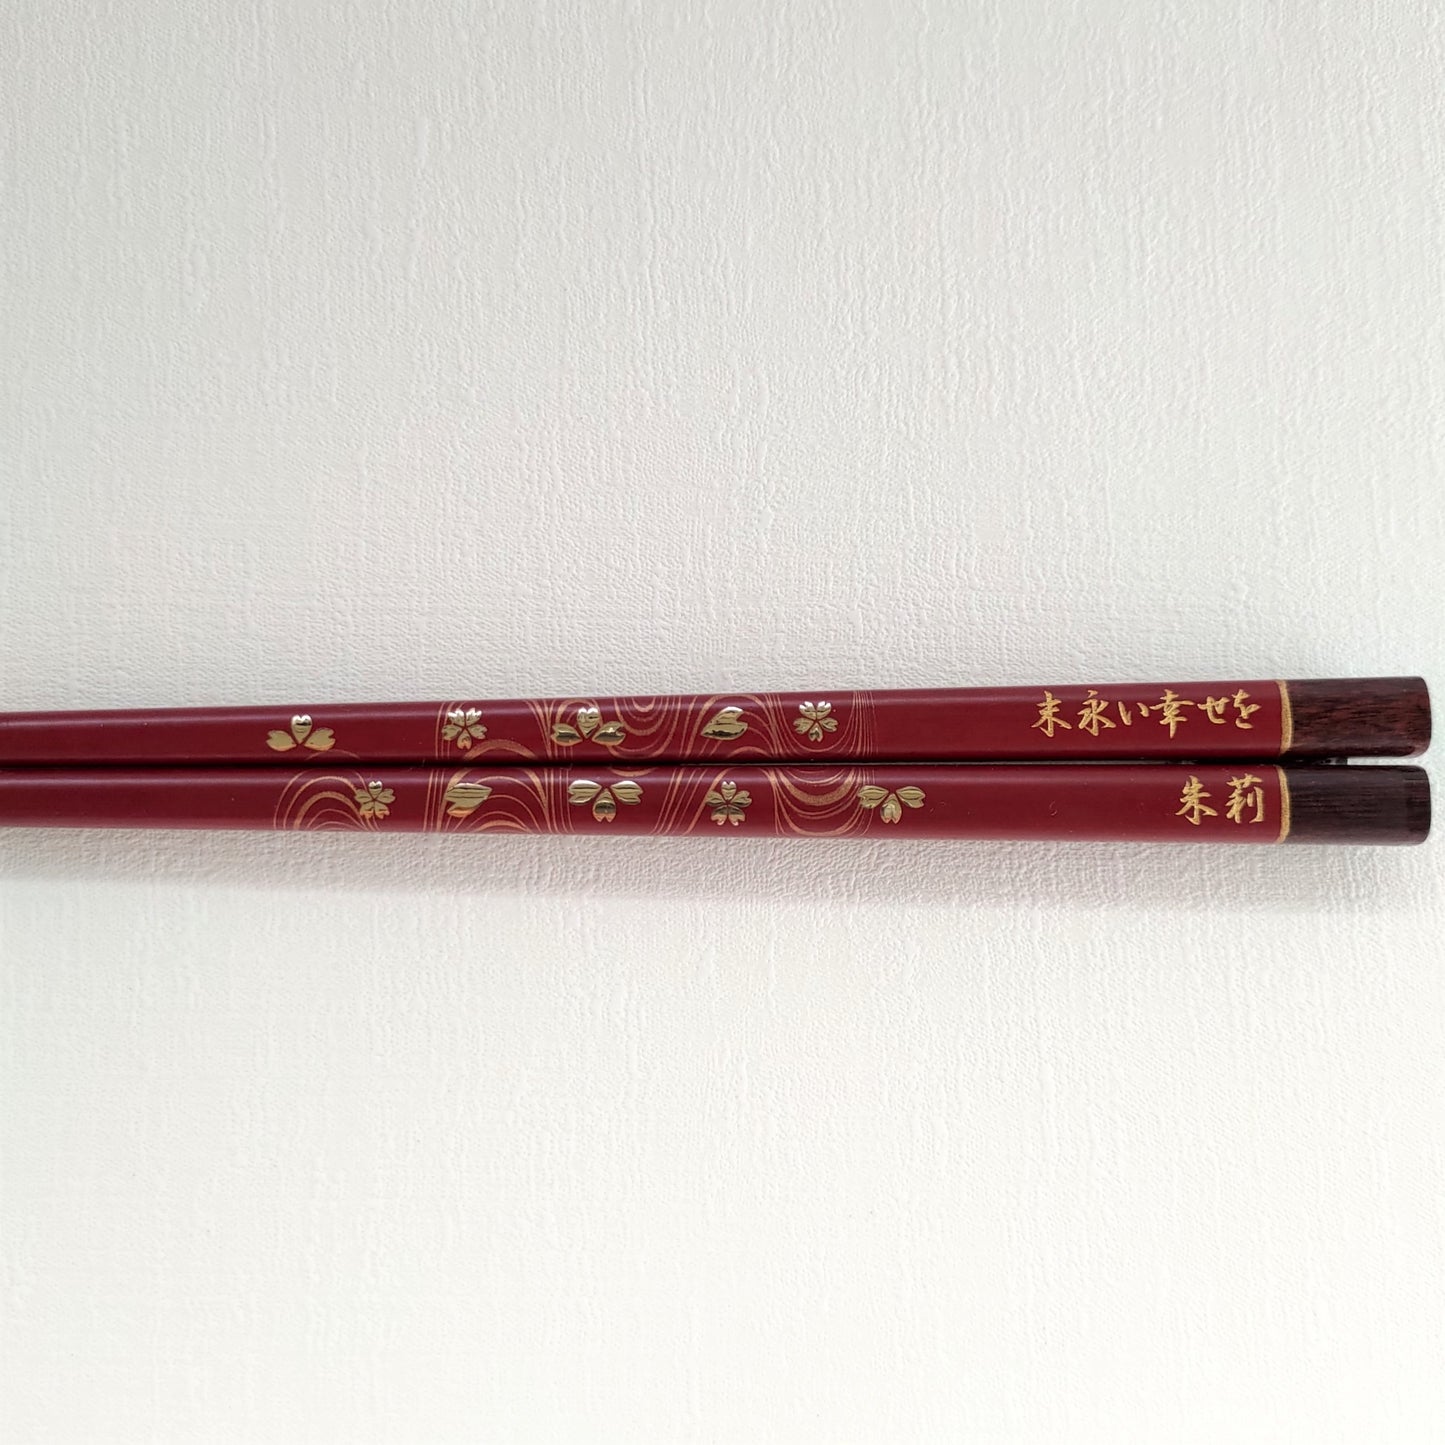 Elegant Japanese chopsticks with cherry blossoms on river stream black red - DOUBLE PAIR